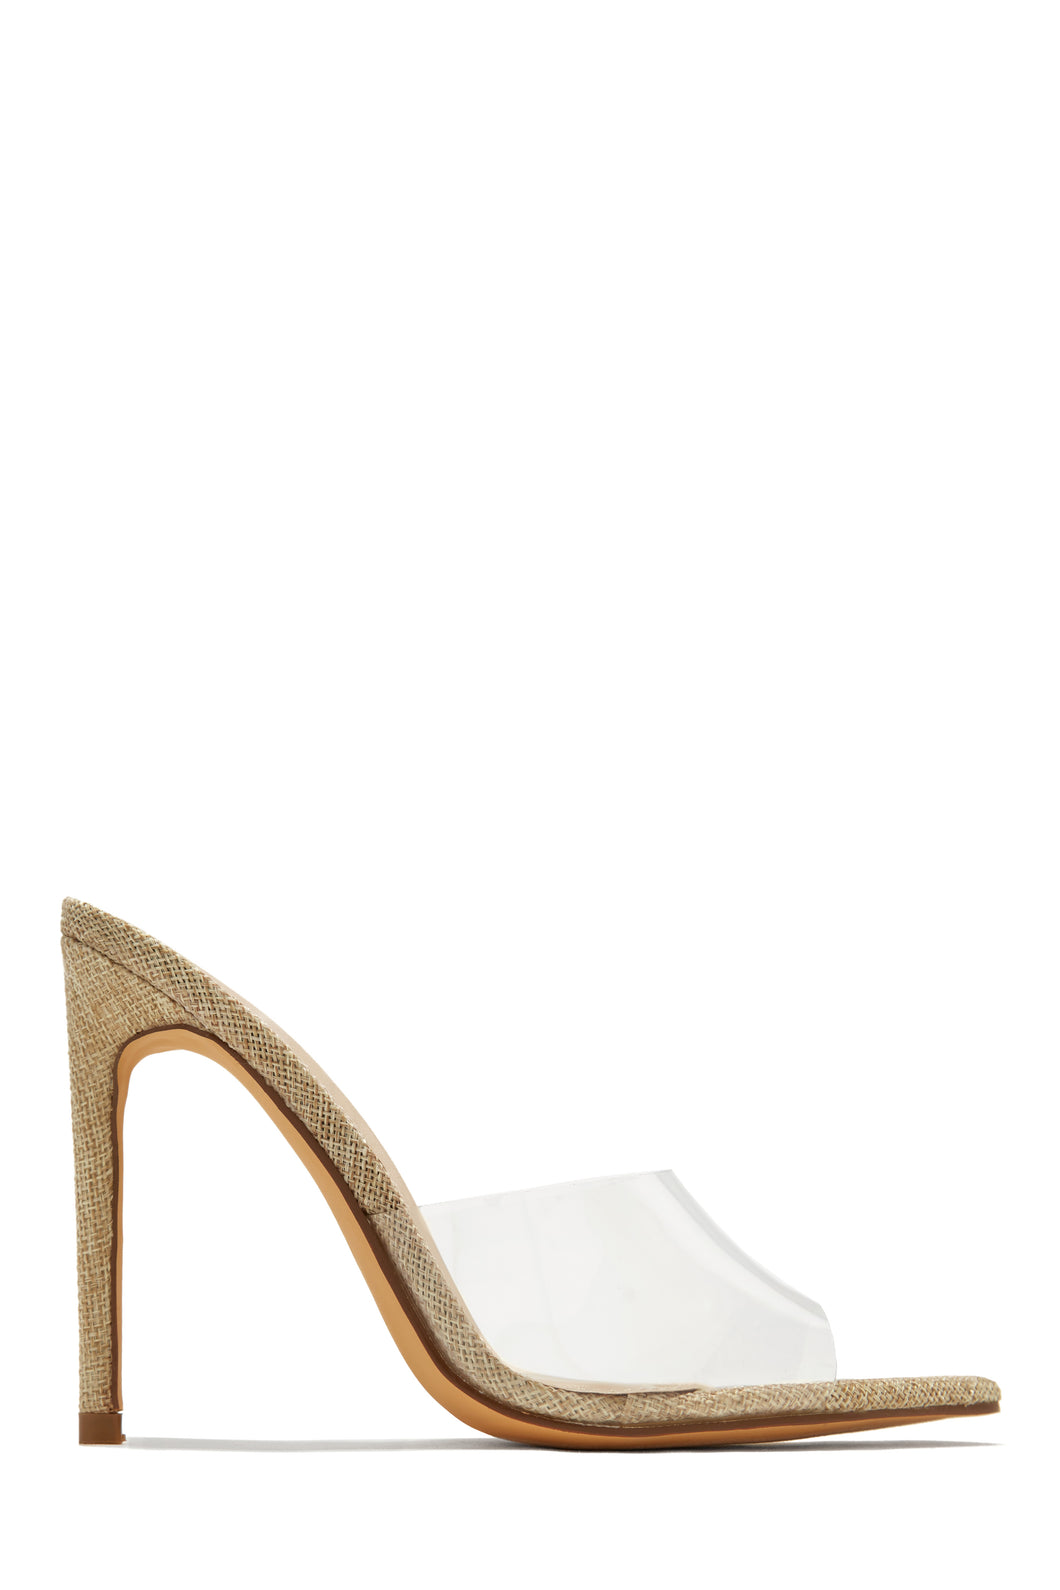 Ionic Clear Strap High Heel Mules - Linen